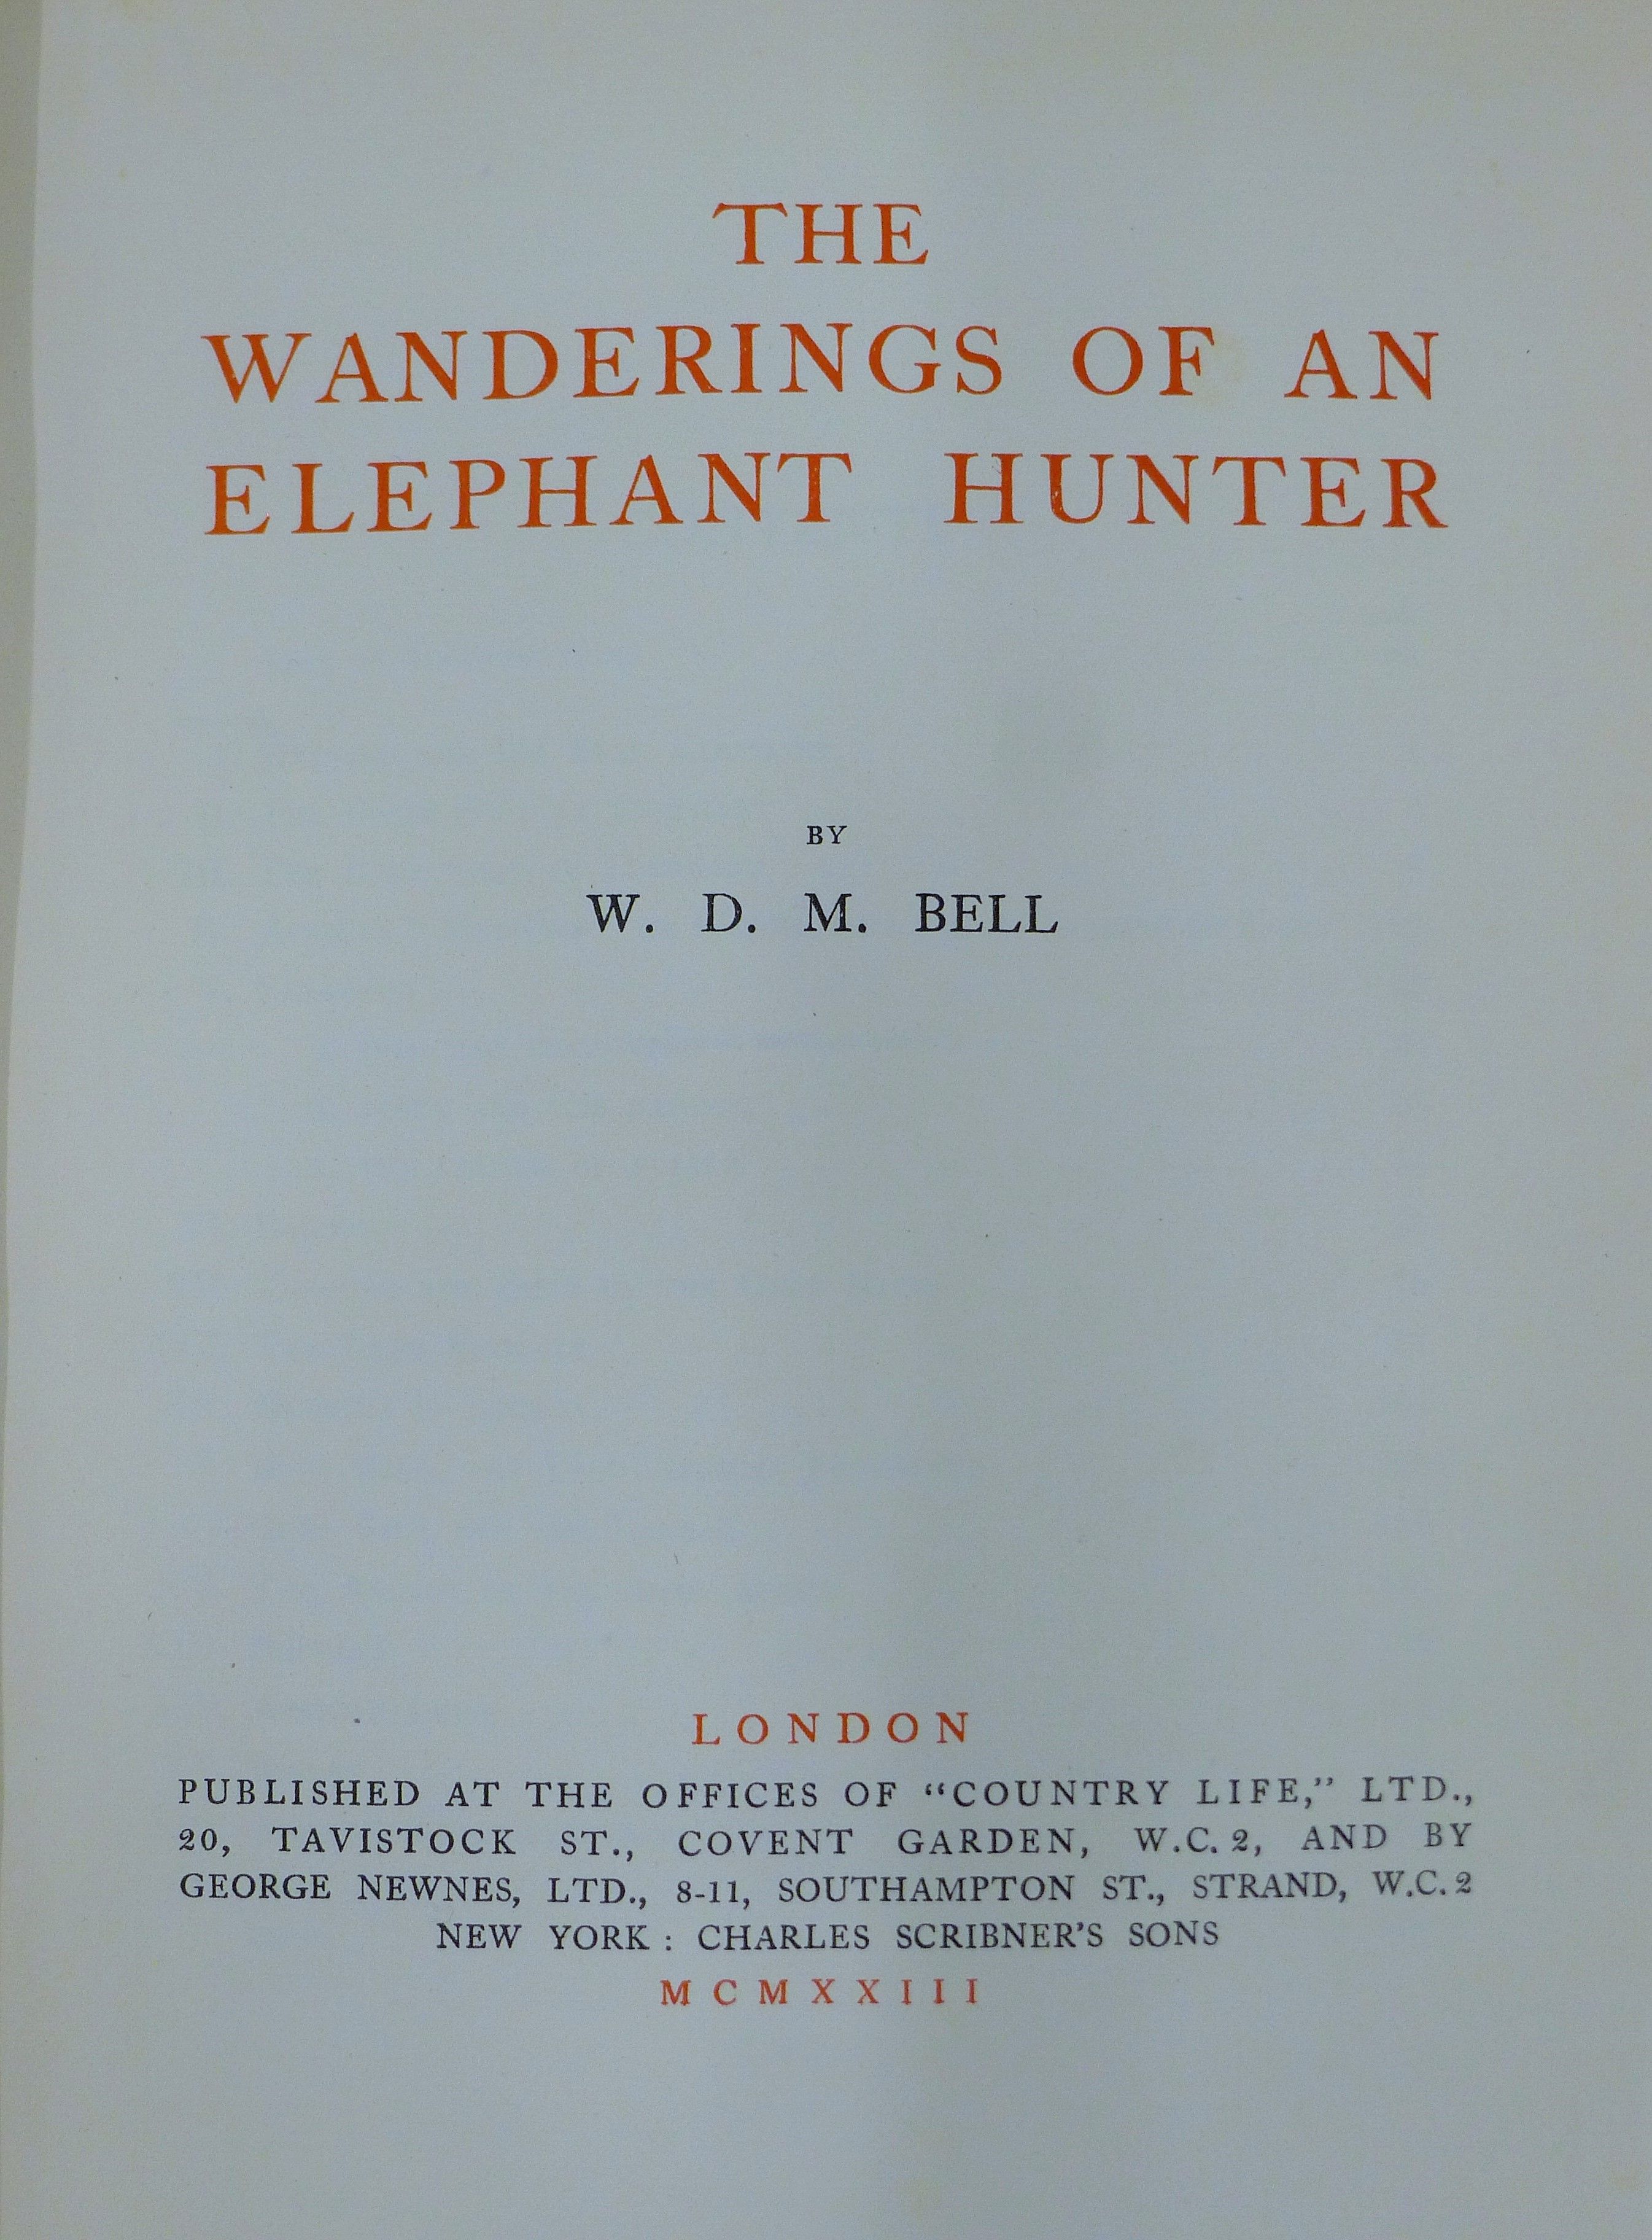 W D M Bell, The Wanderings of an Elephant Hunter, 1933, first edition. - Image 3 of 7